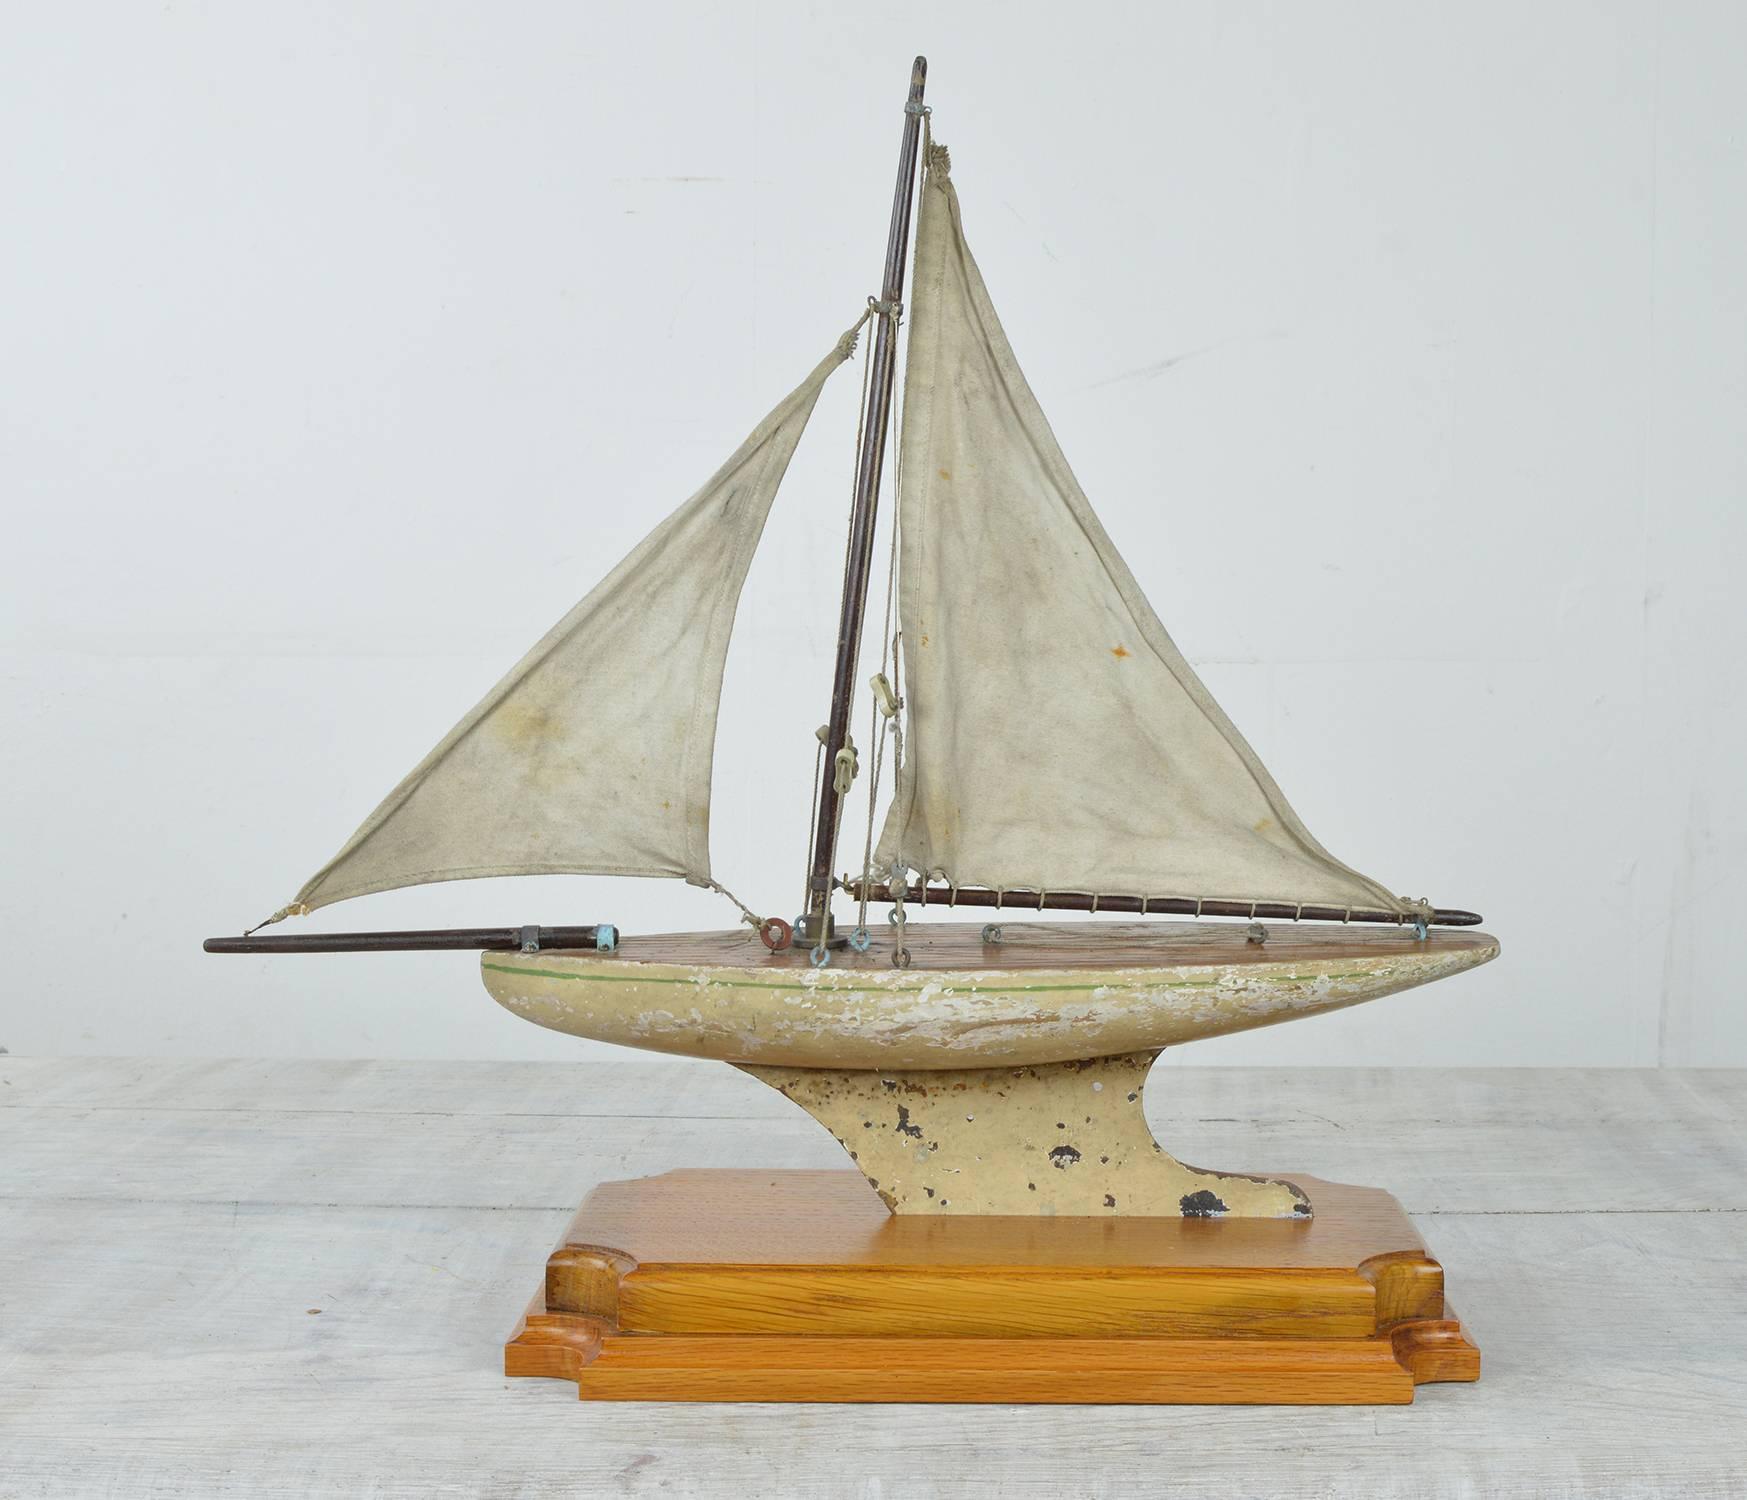 Charming little pond yacht.

Painted cream with a single green line detail.

Original paint and original canvas sails.

Slightly distressed but nothing serious. 

Mounted on a golden oak pedestal.